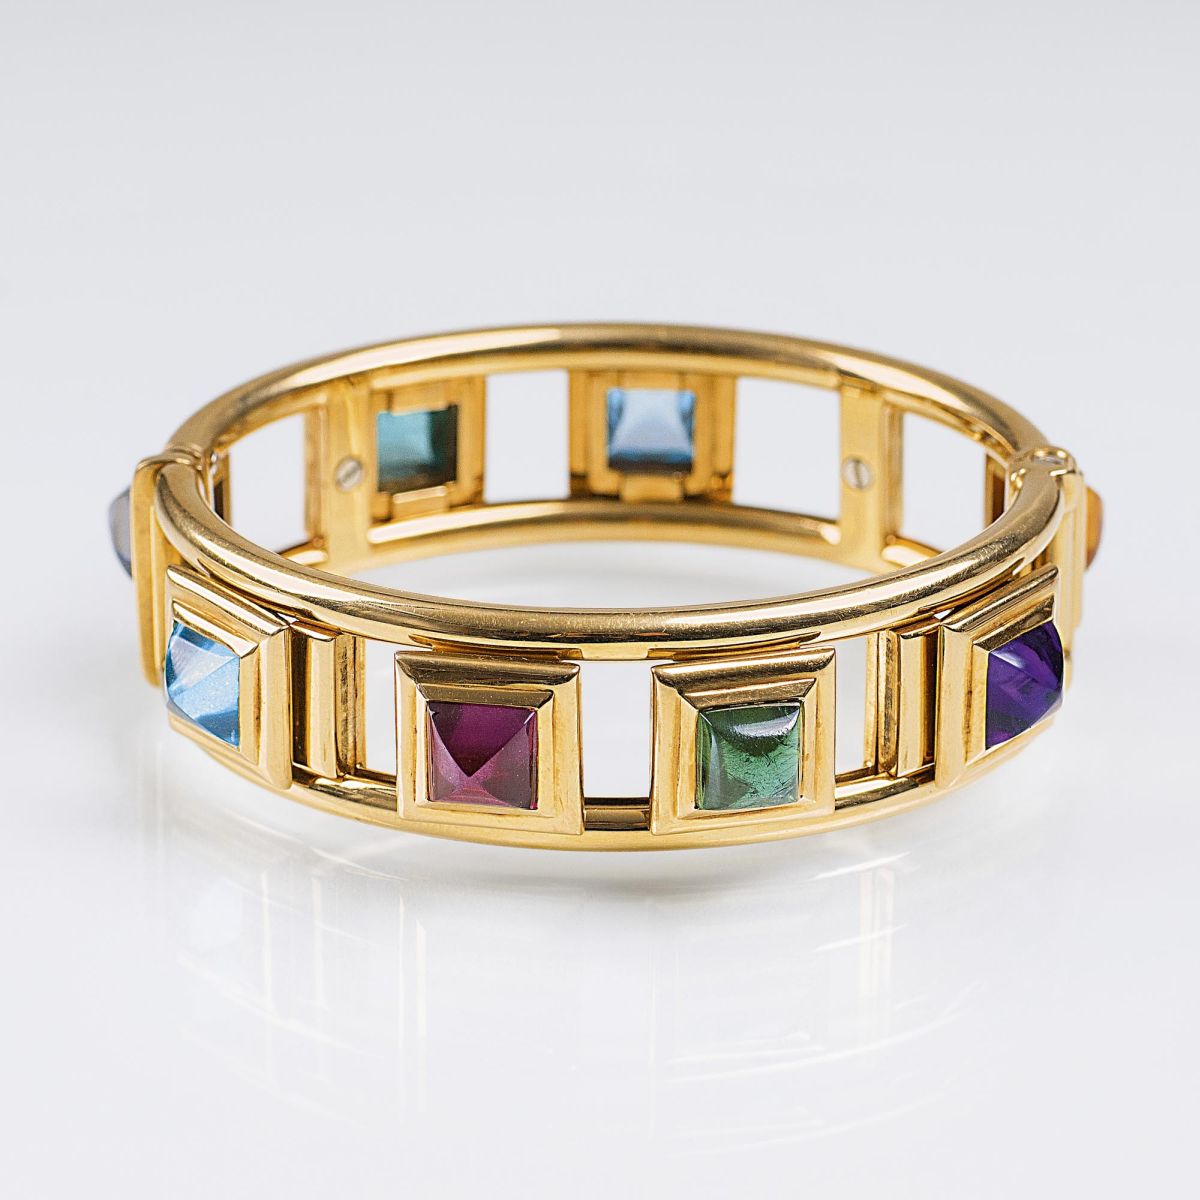 A Gold Bangle Bracelet with Coloured Stones